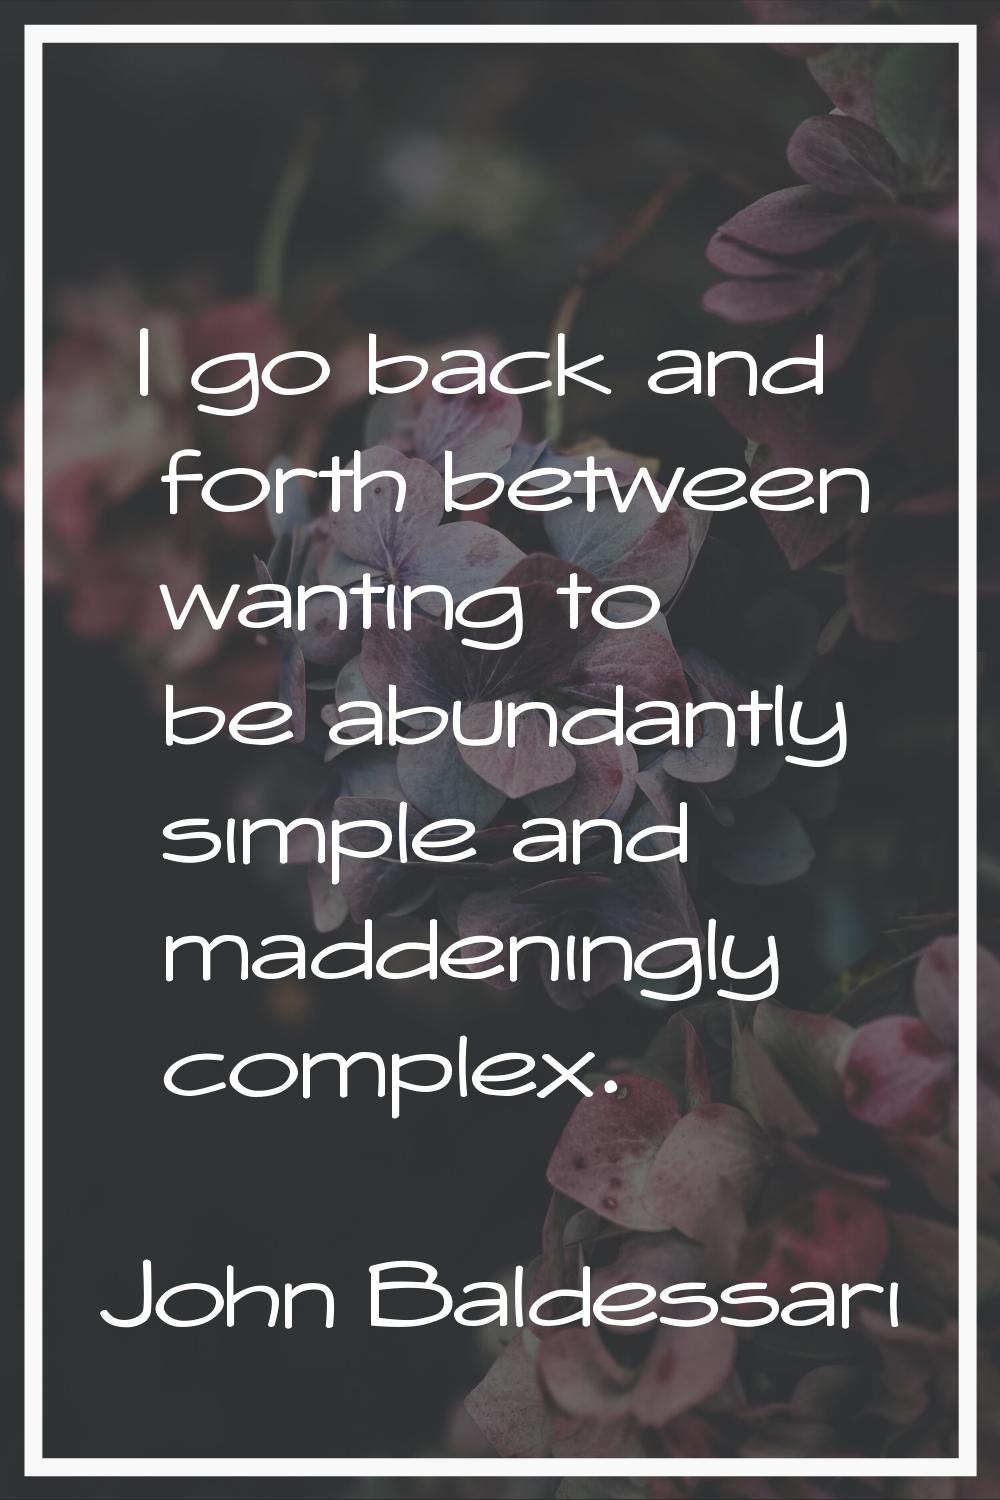 I go back and forth between wanting to be abundantly simple and maddeningly complex.